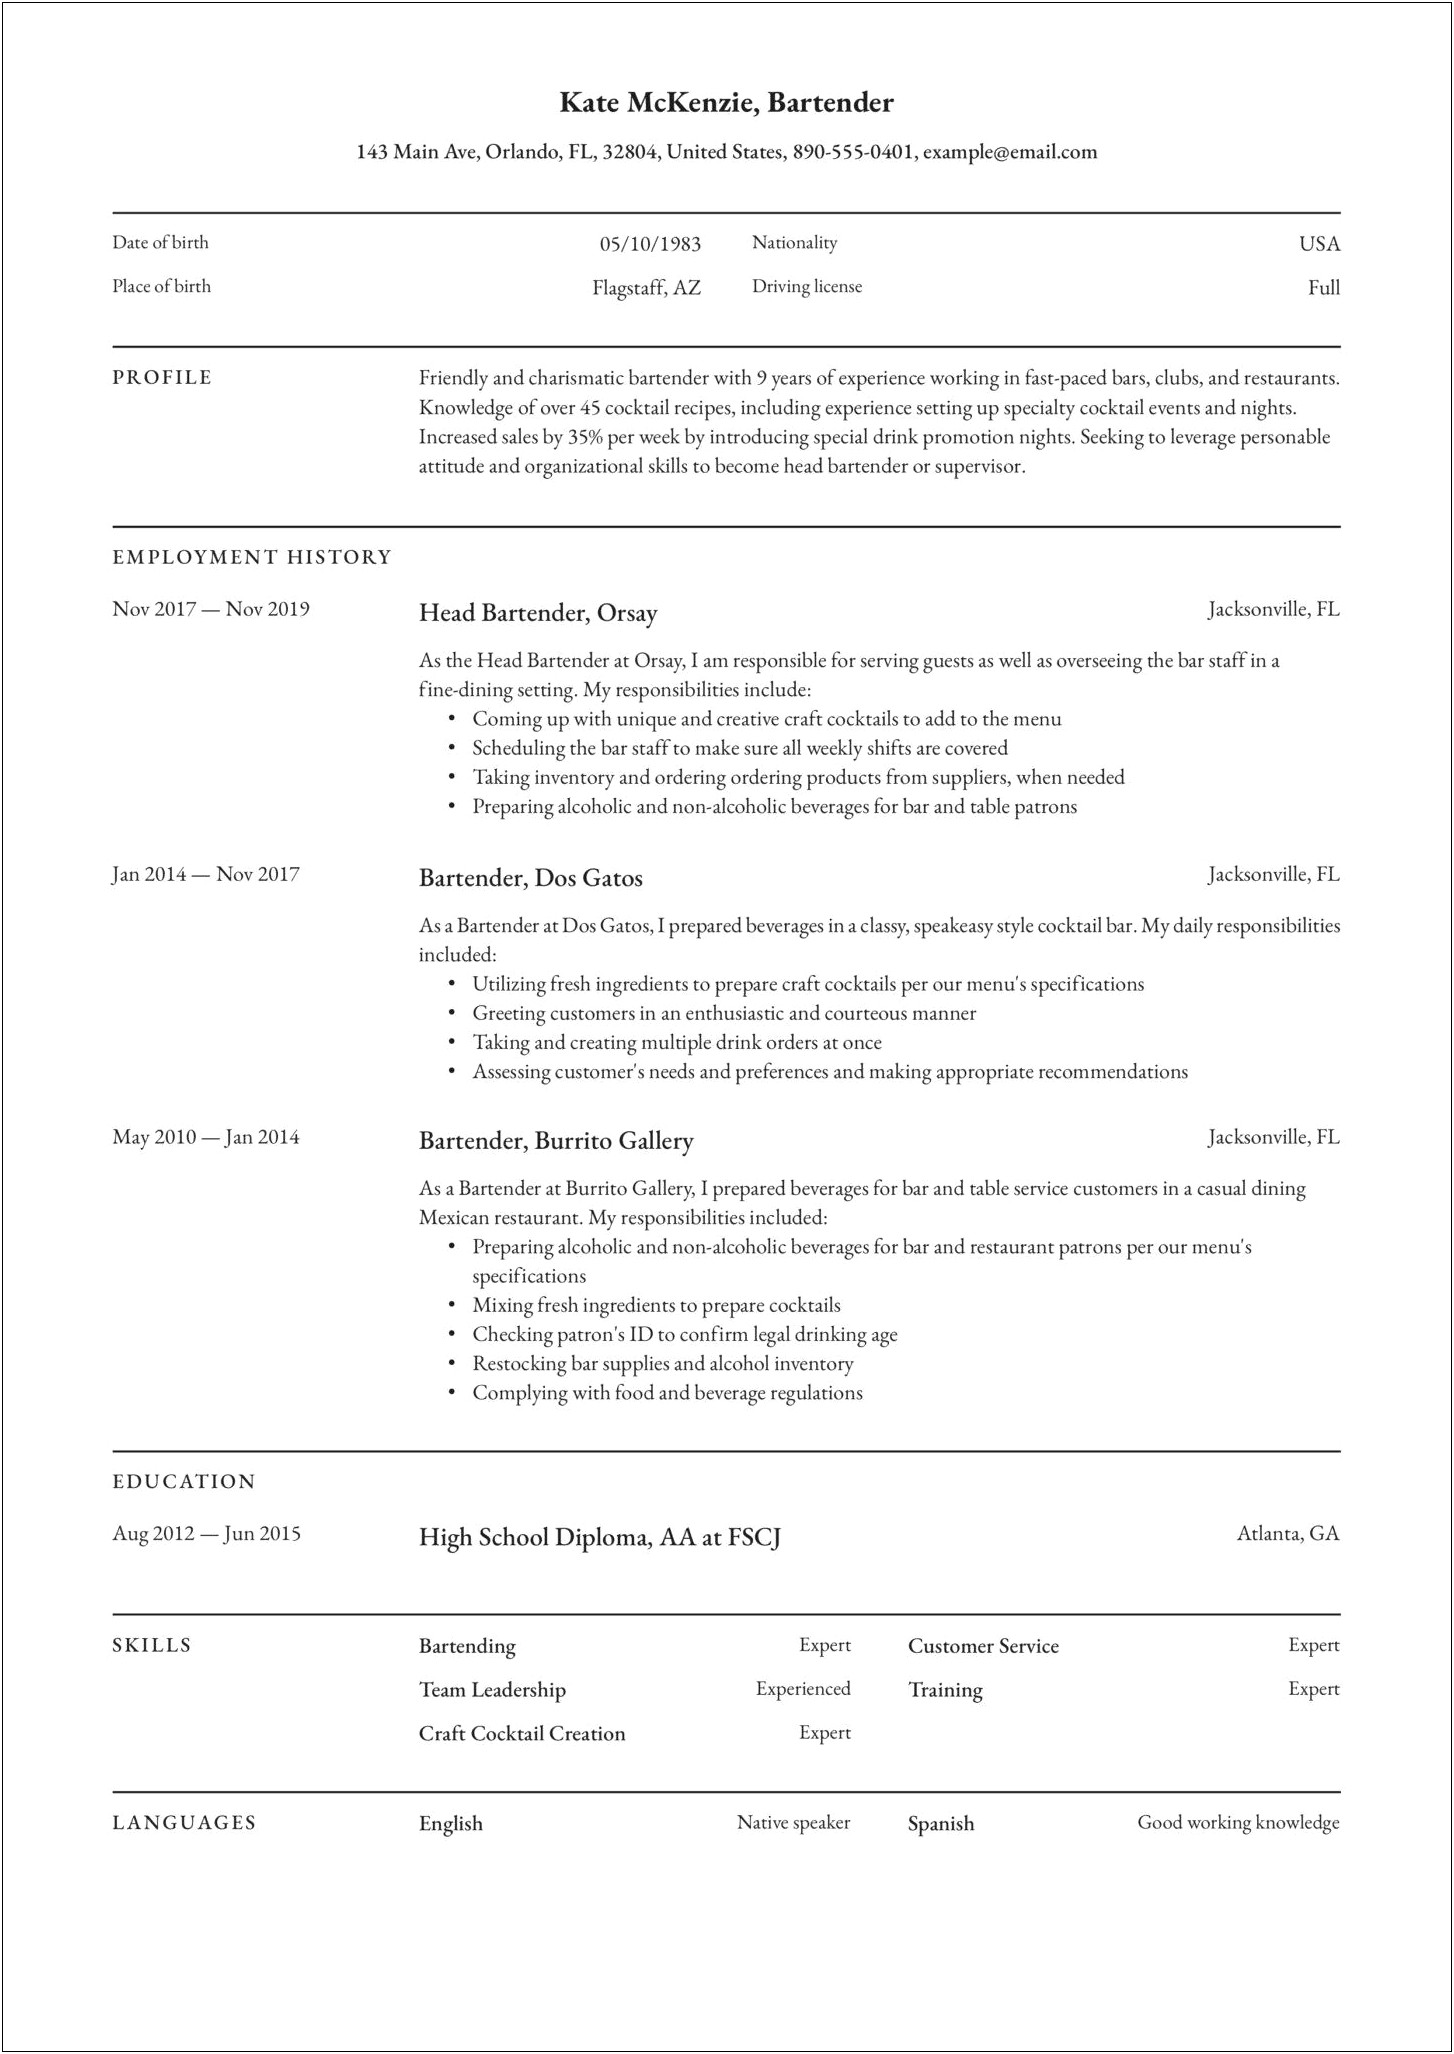 Examples Of Bartending Resumes With No Experience